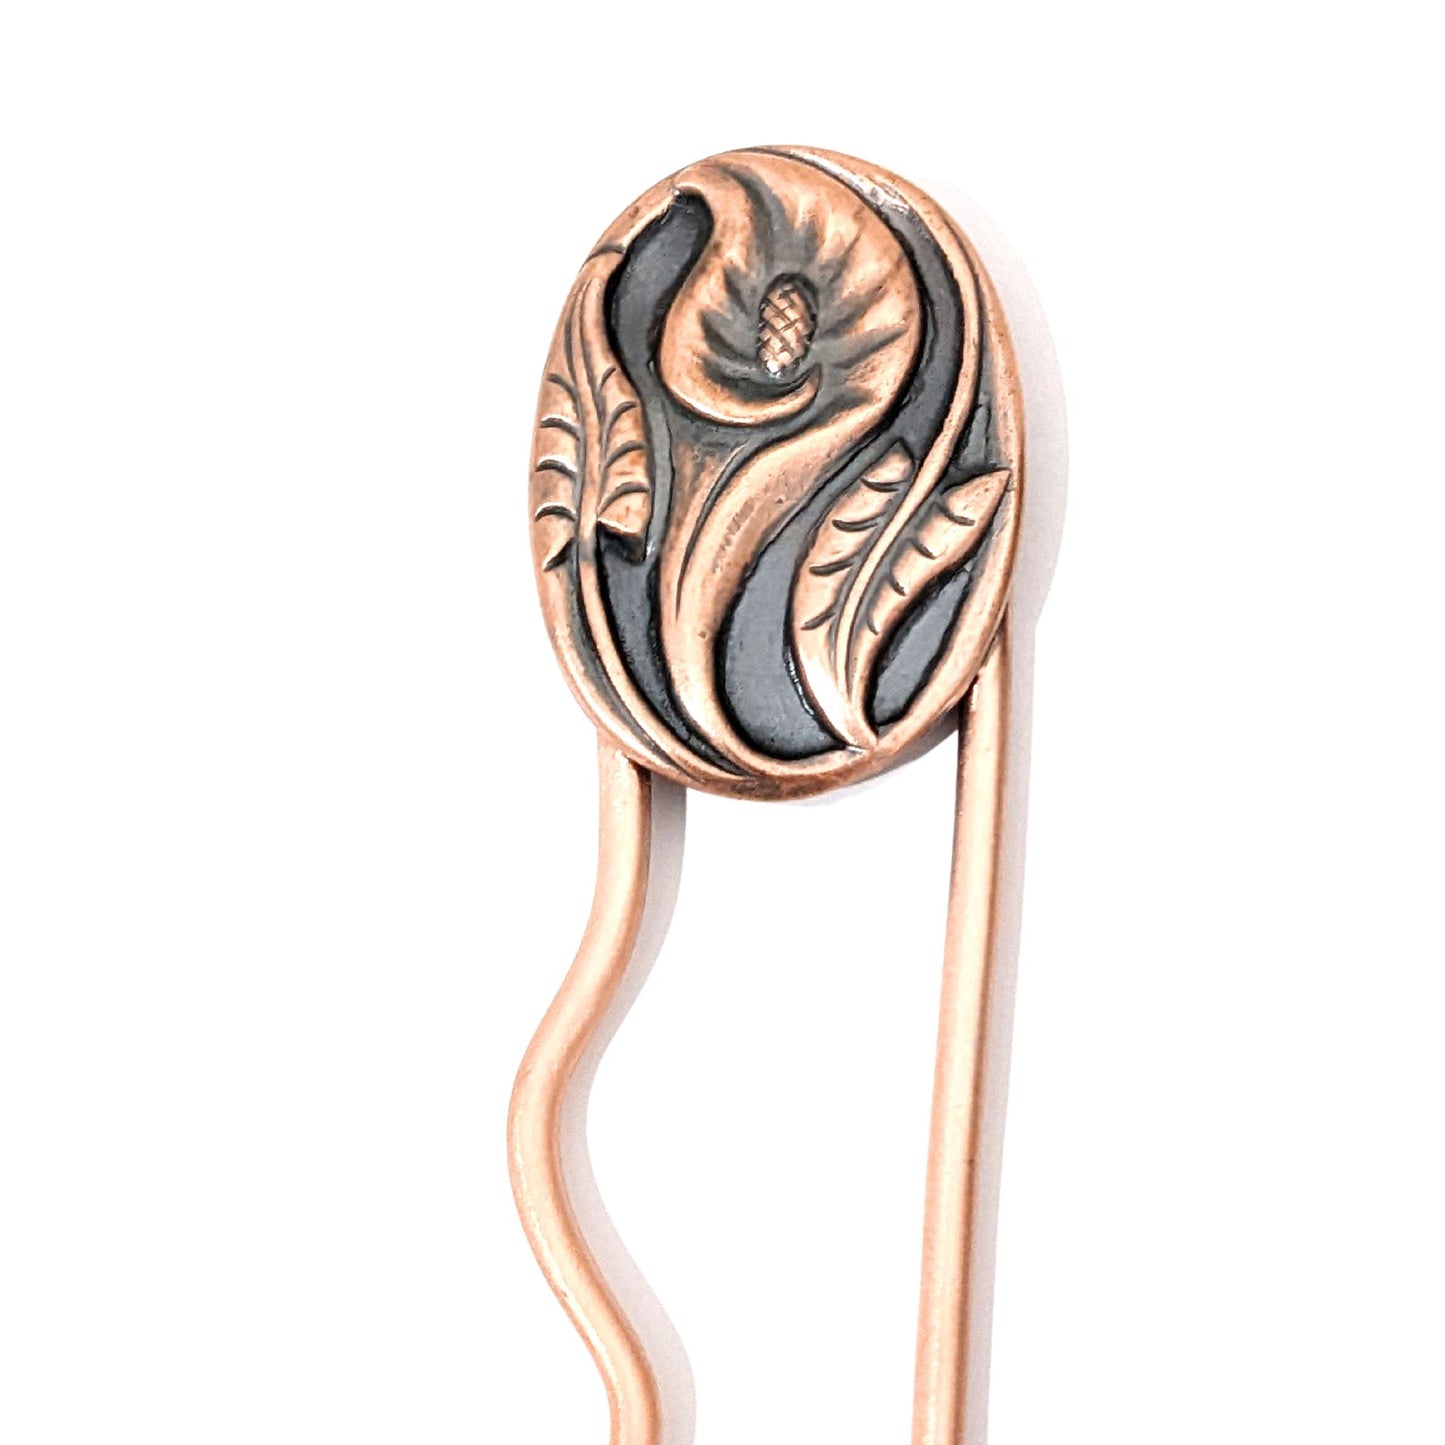 Copper hair fork with a calla lily flower design. Large oval copper piece with a single calla flower in the middle. A stem and leaf facing upward on the left side of the oval, and one facing downward on the right side of the oval. 